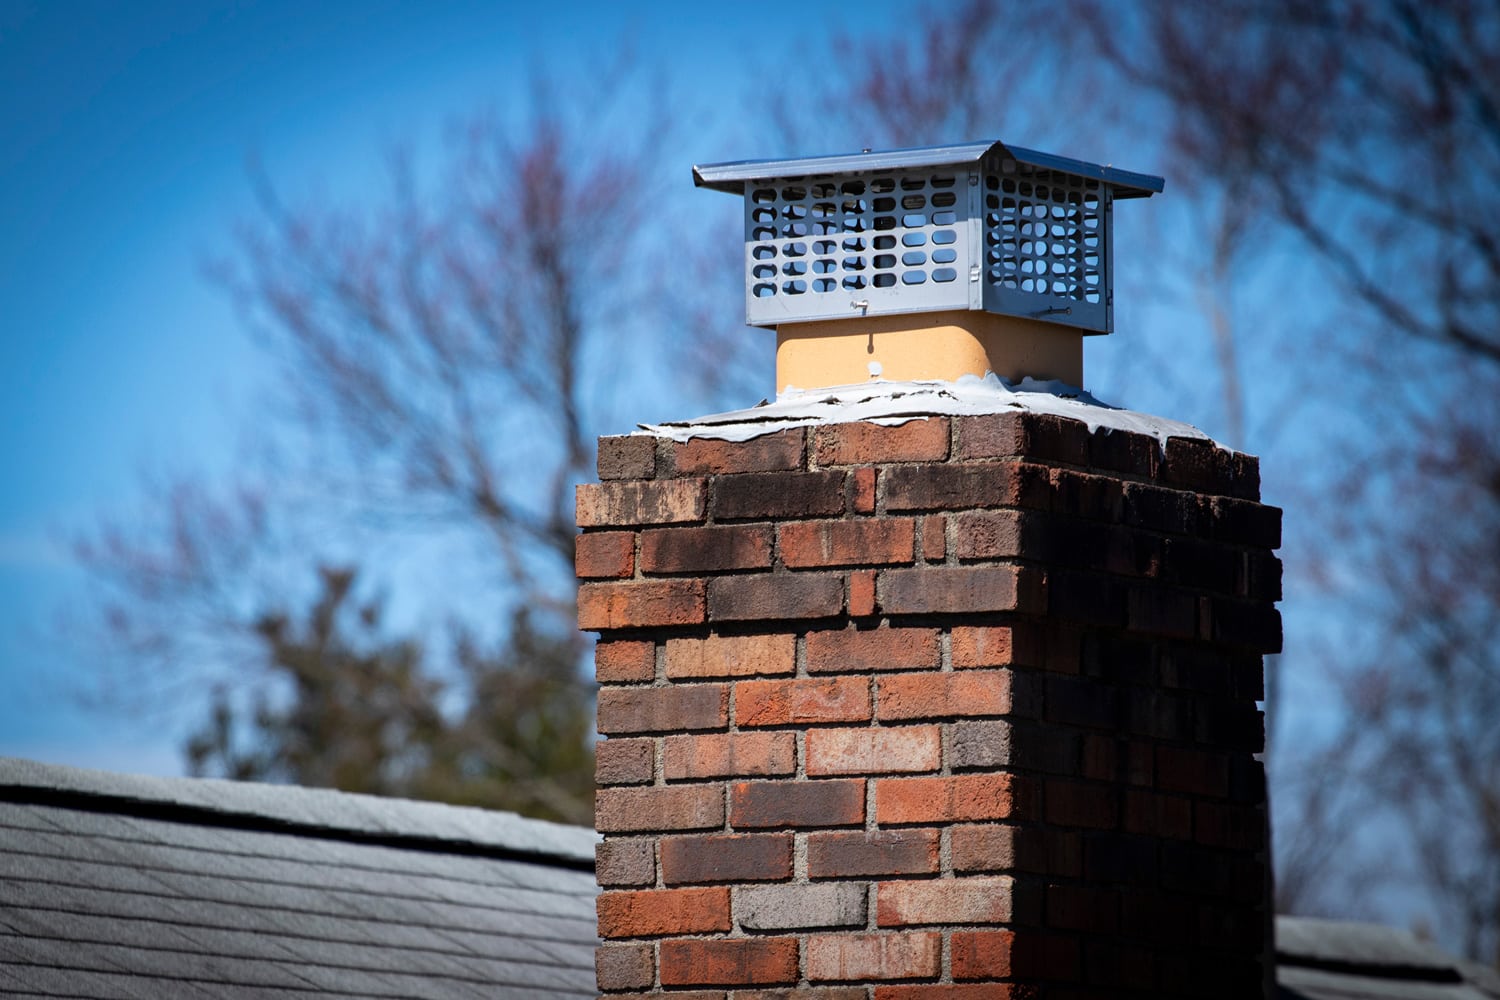 Chimney cap installed to prevent rodent entry to home attic building